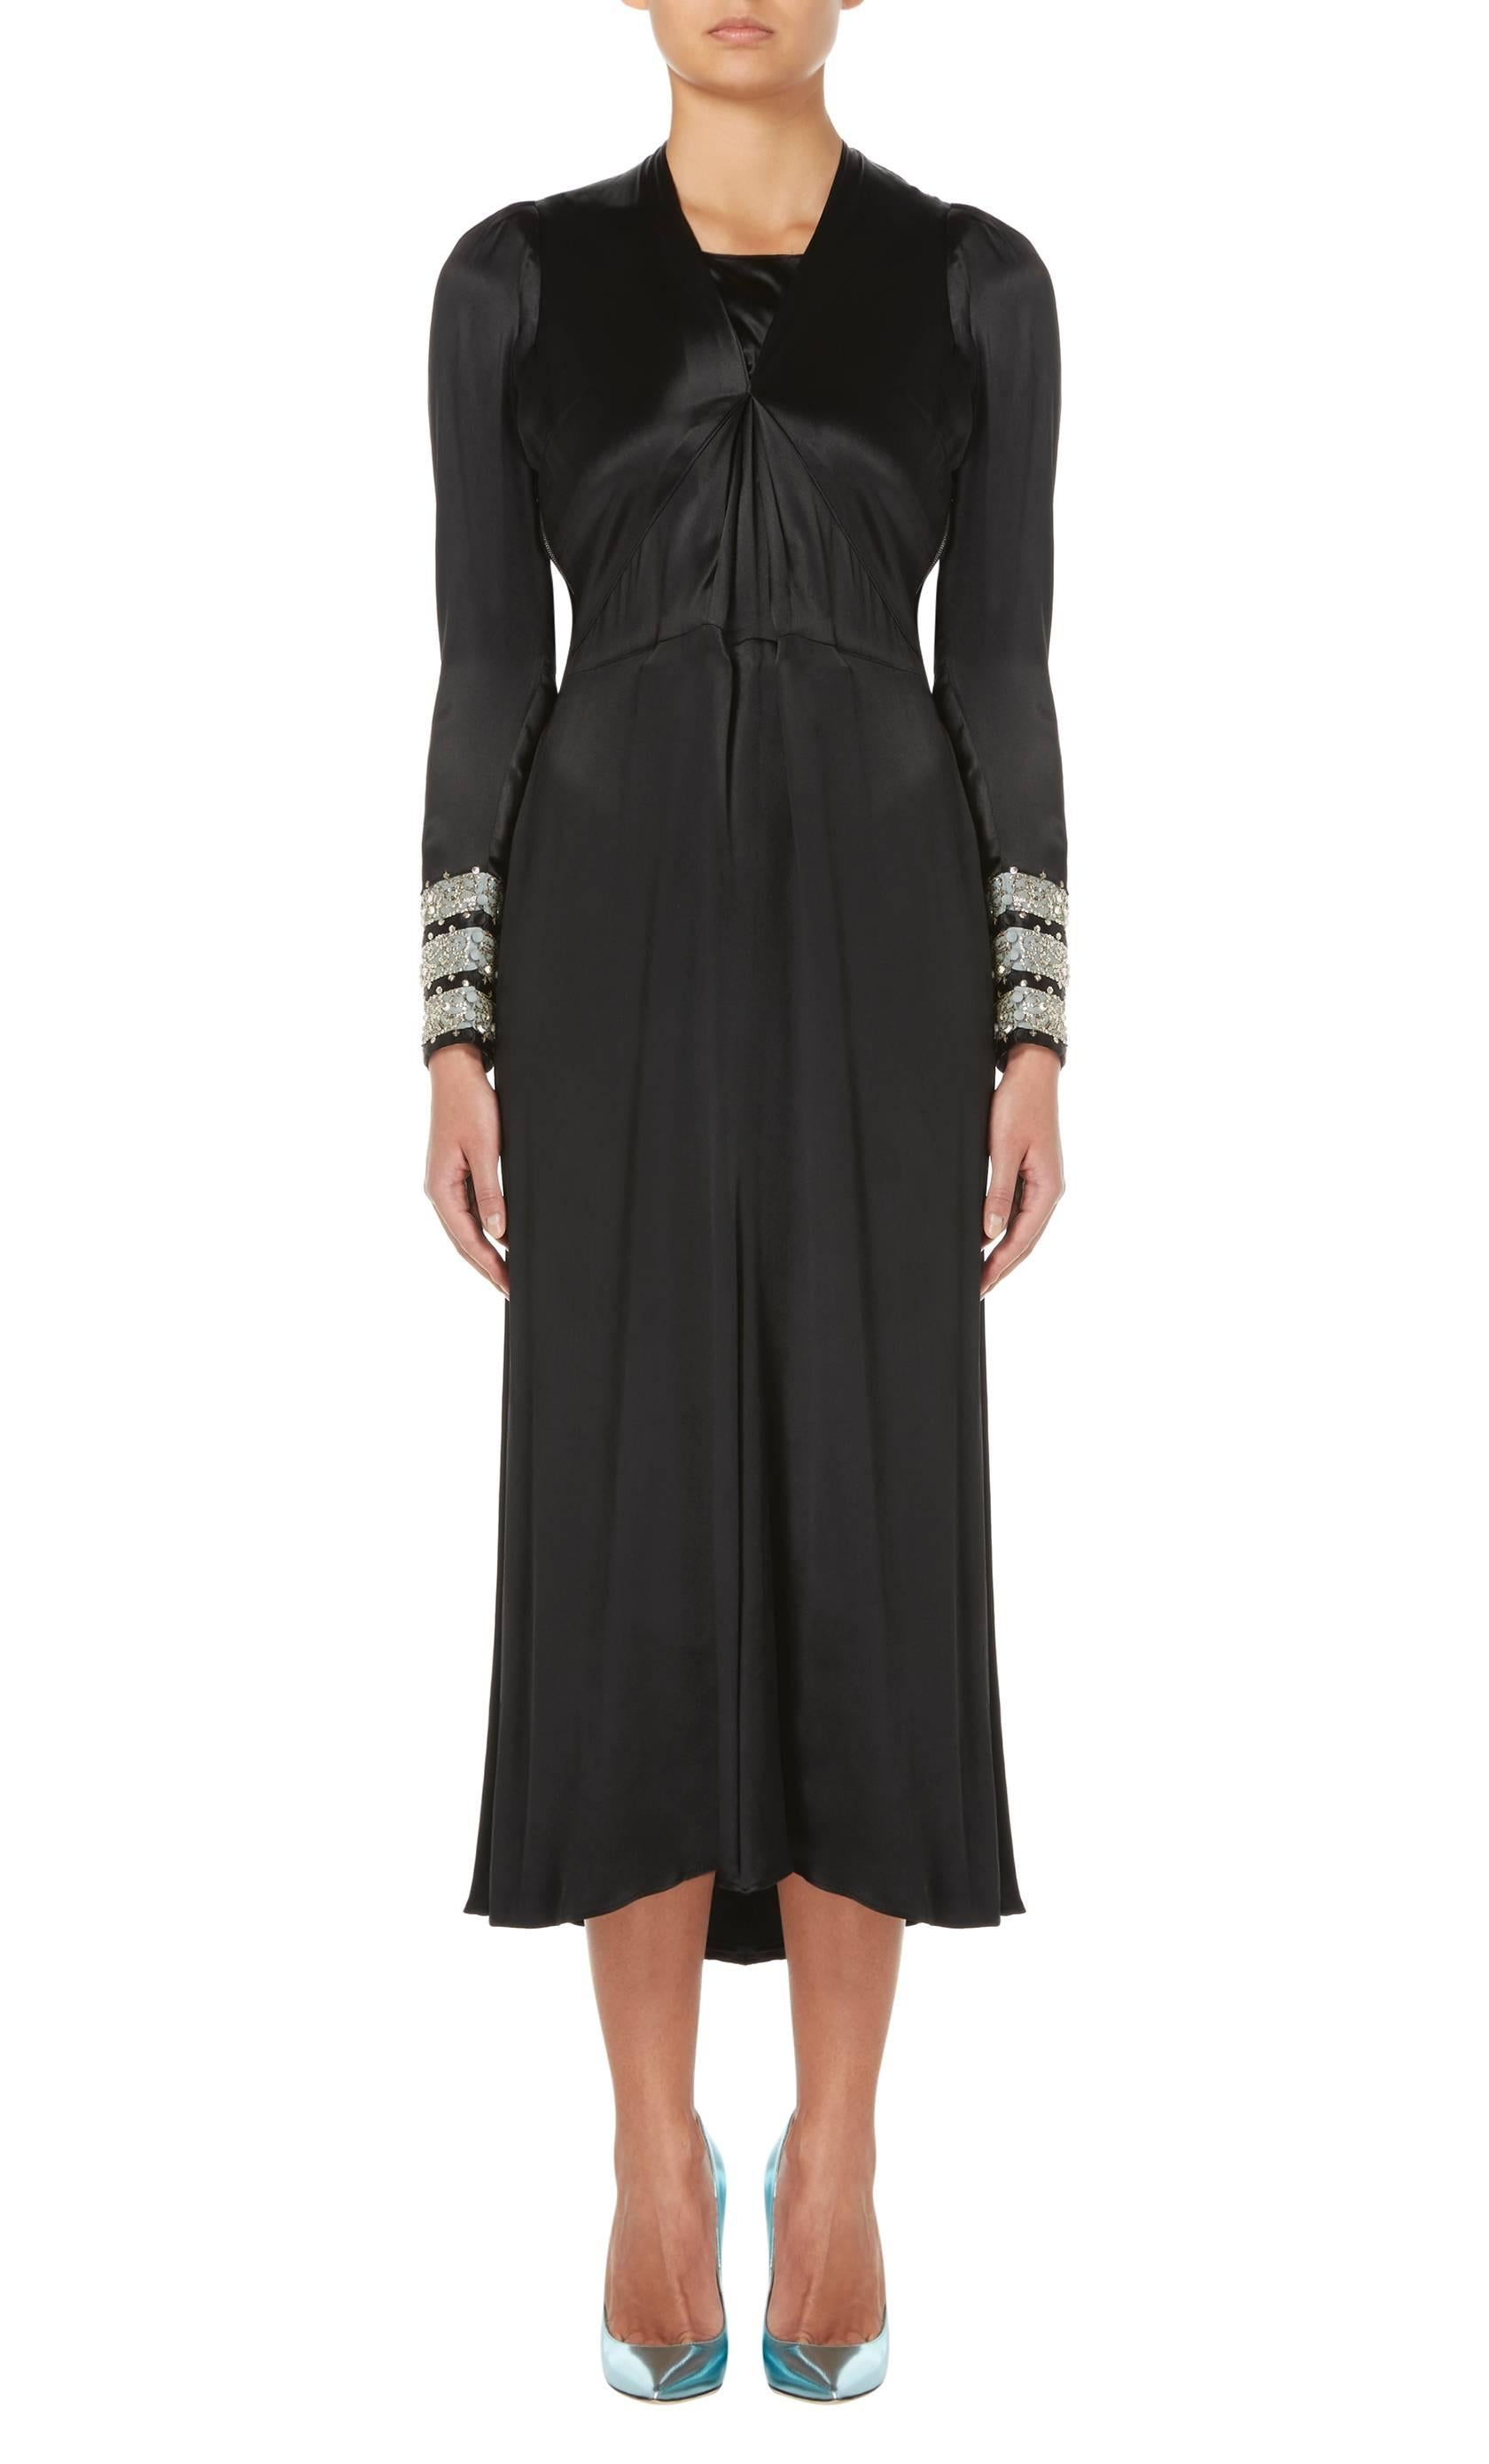 An incredible piece of Lanvin haute couture, this black silk dress is an elegant option for the red carpet or special occasion. The long sleeves are striped with powder blue silk around the cuffs and embellished with silver metallic thread and